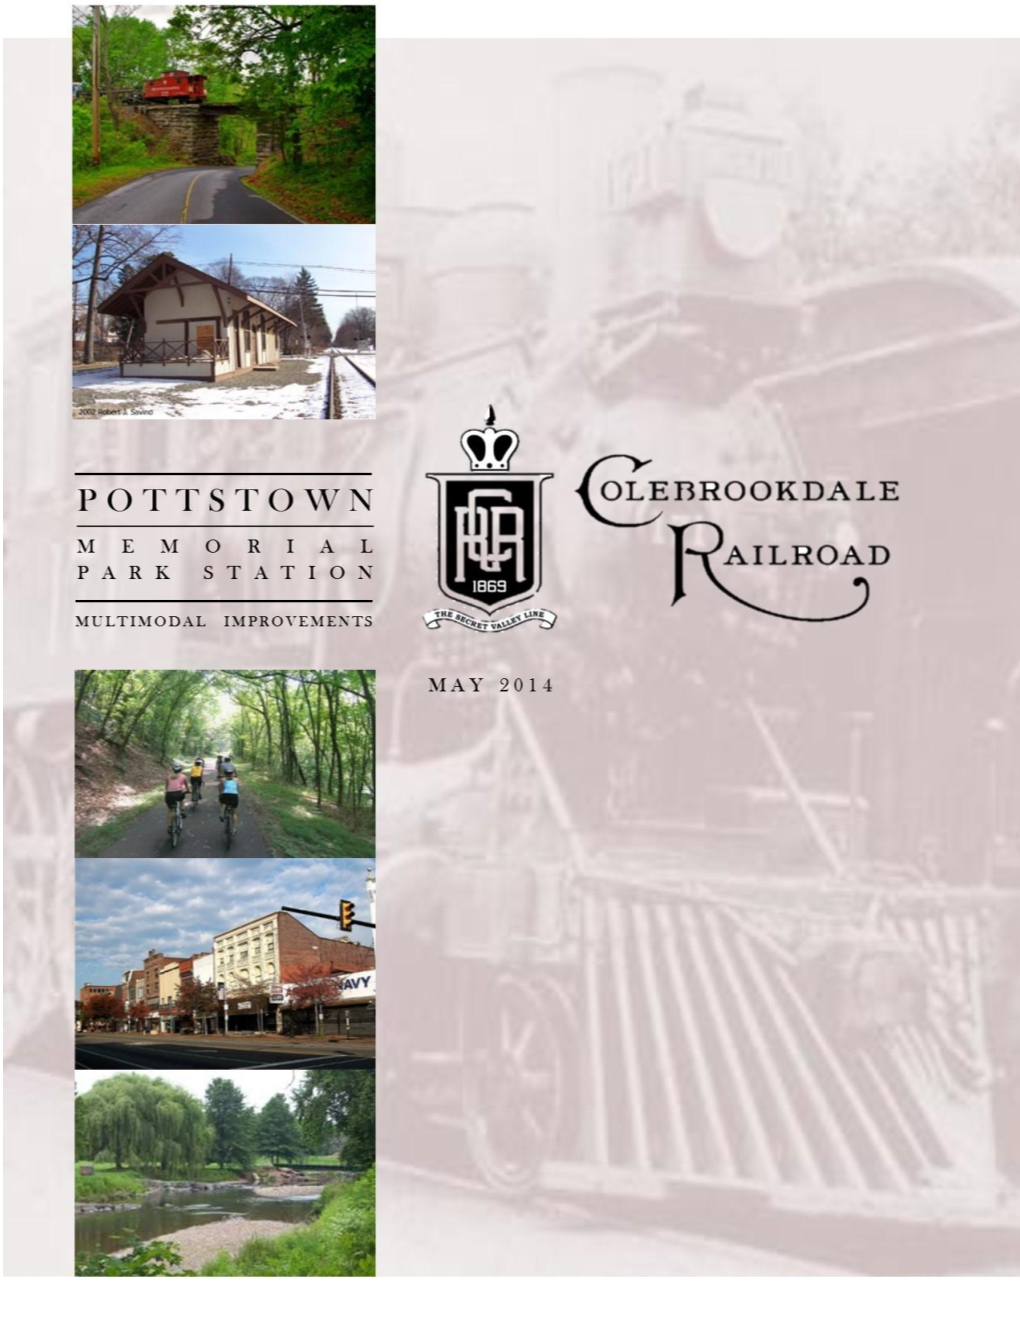 I. About the Colebrookdale Railroad Project